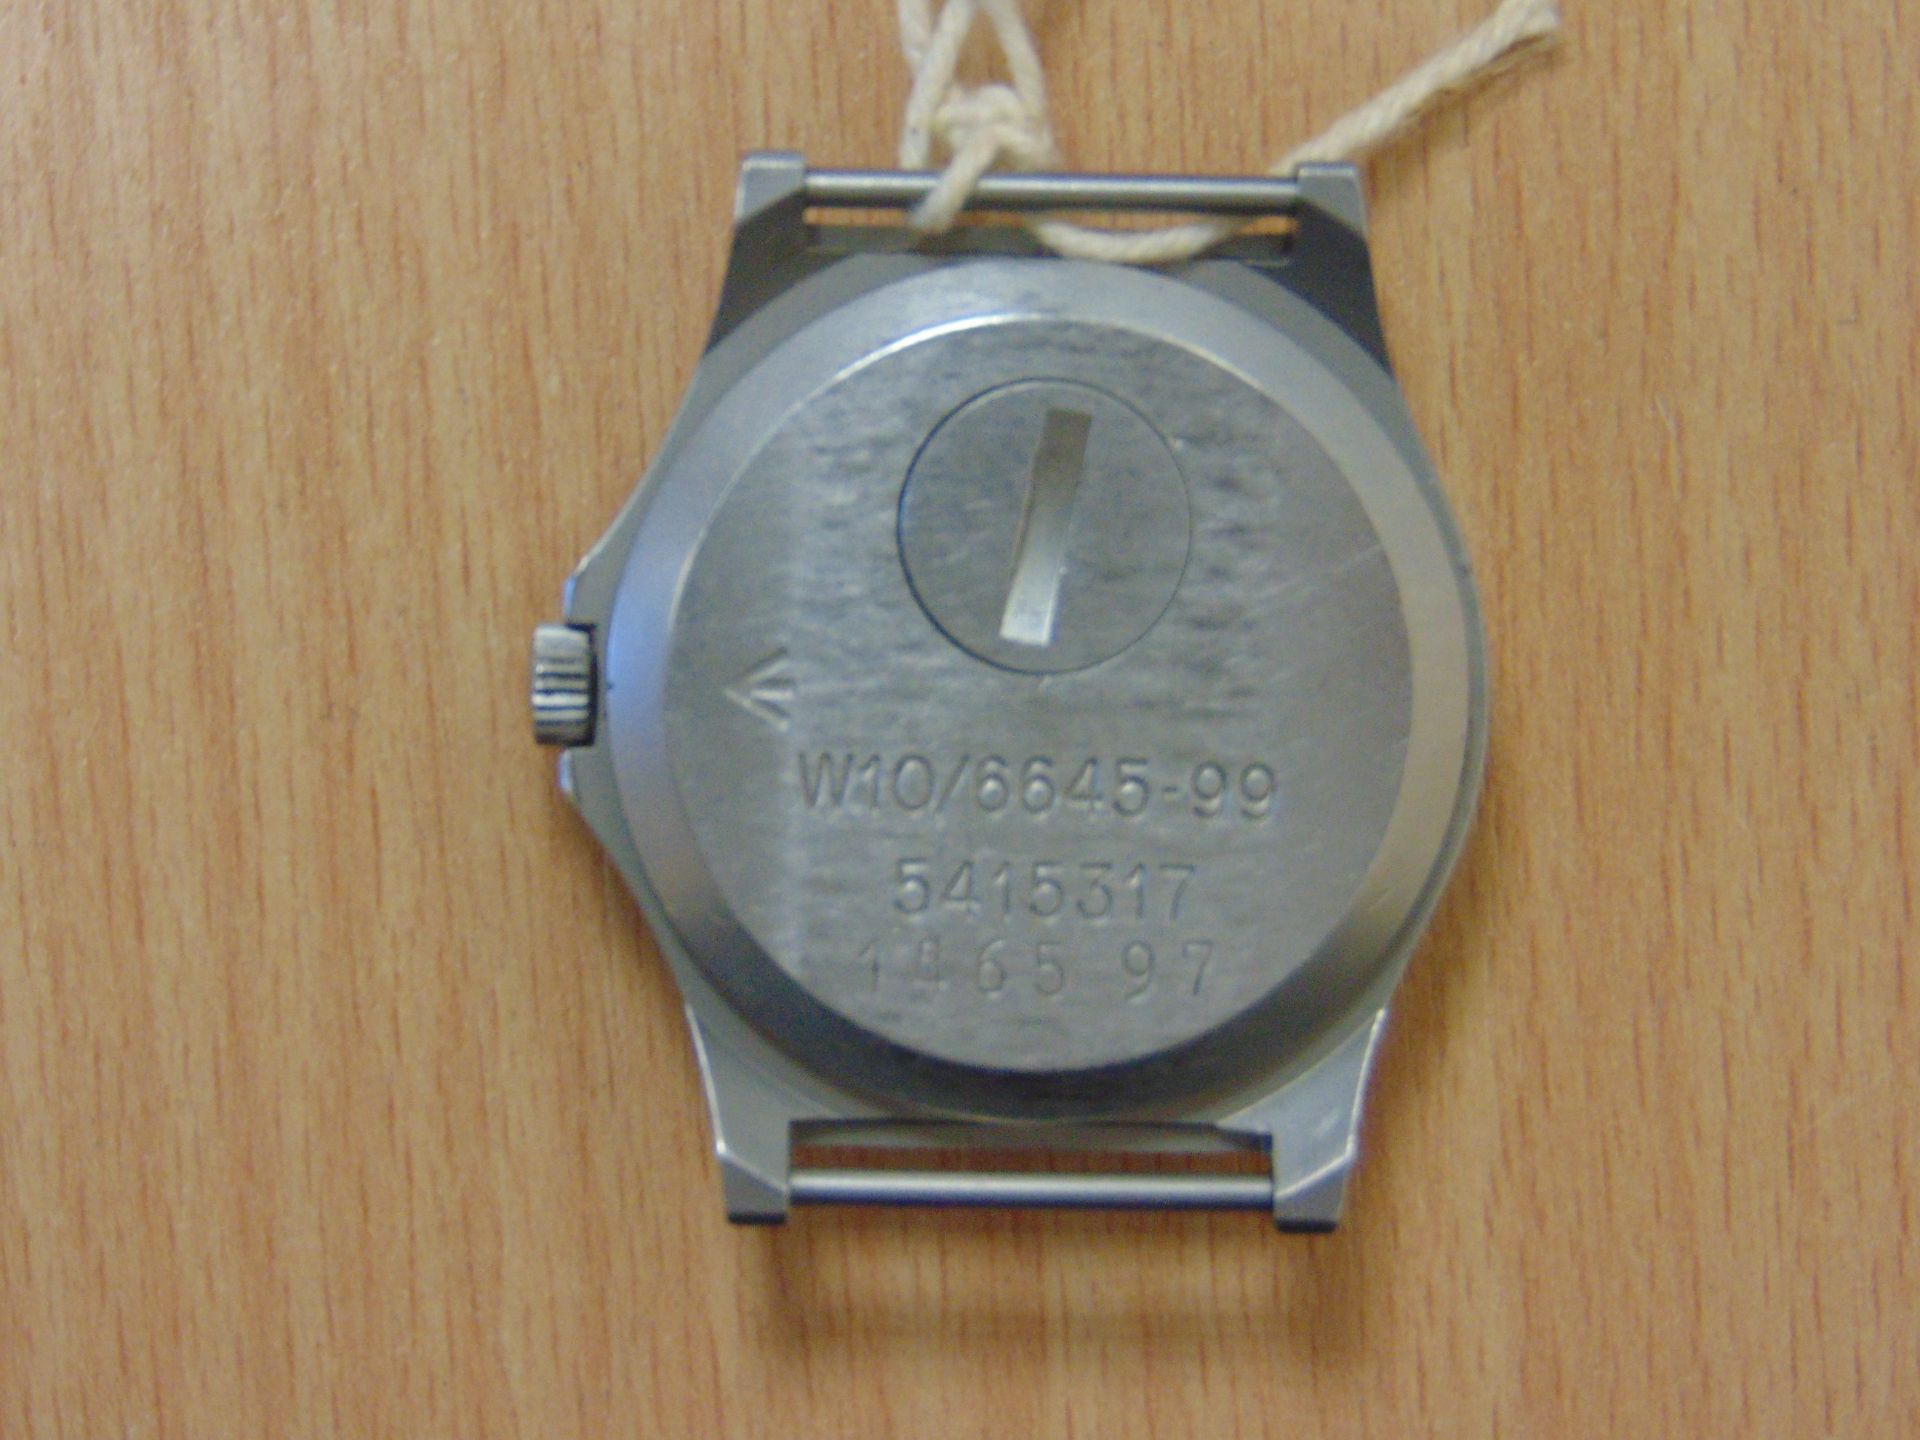 2X CWC W10 SERVICE WATCHES NATO NUMBERS DATE 1997 - Image 9 of 9